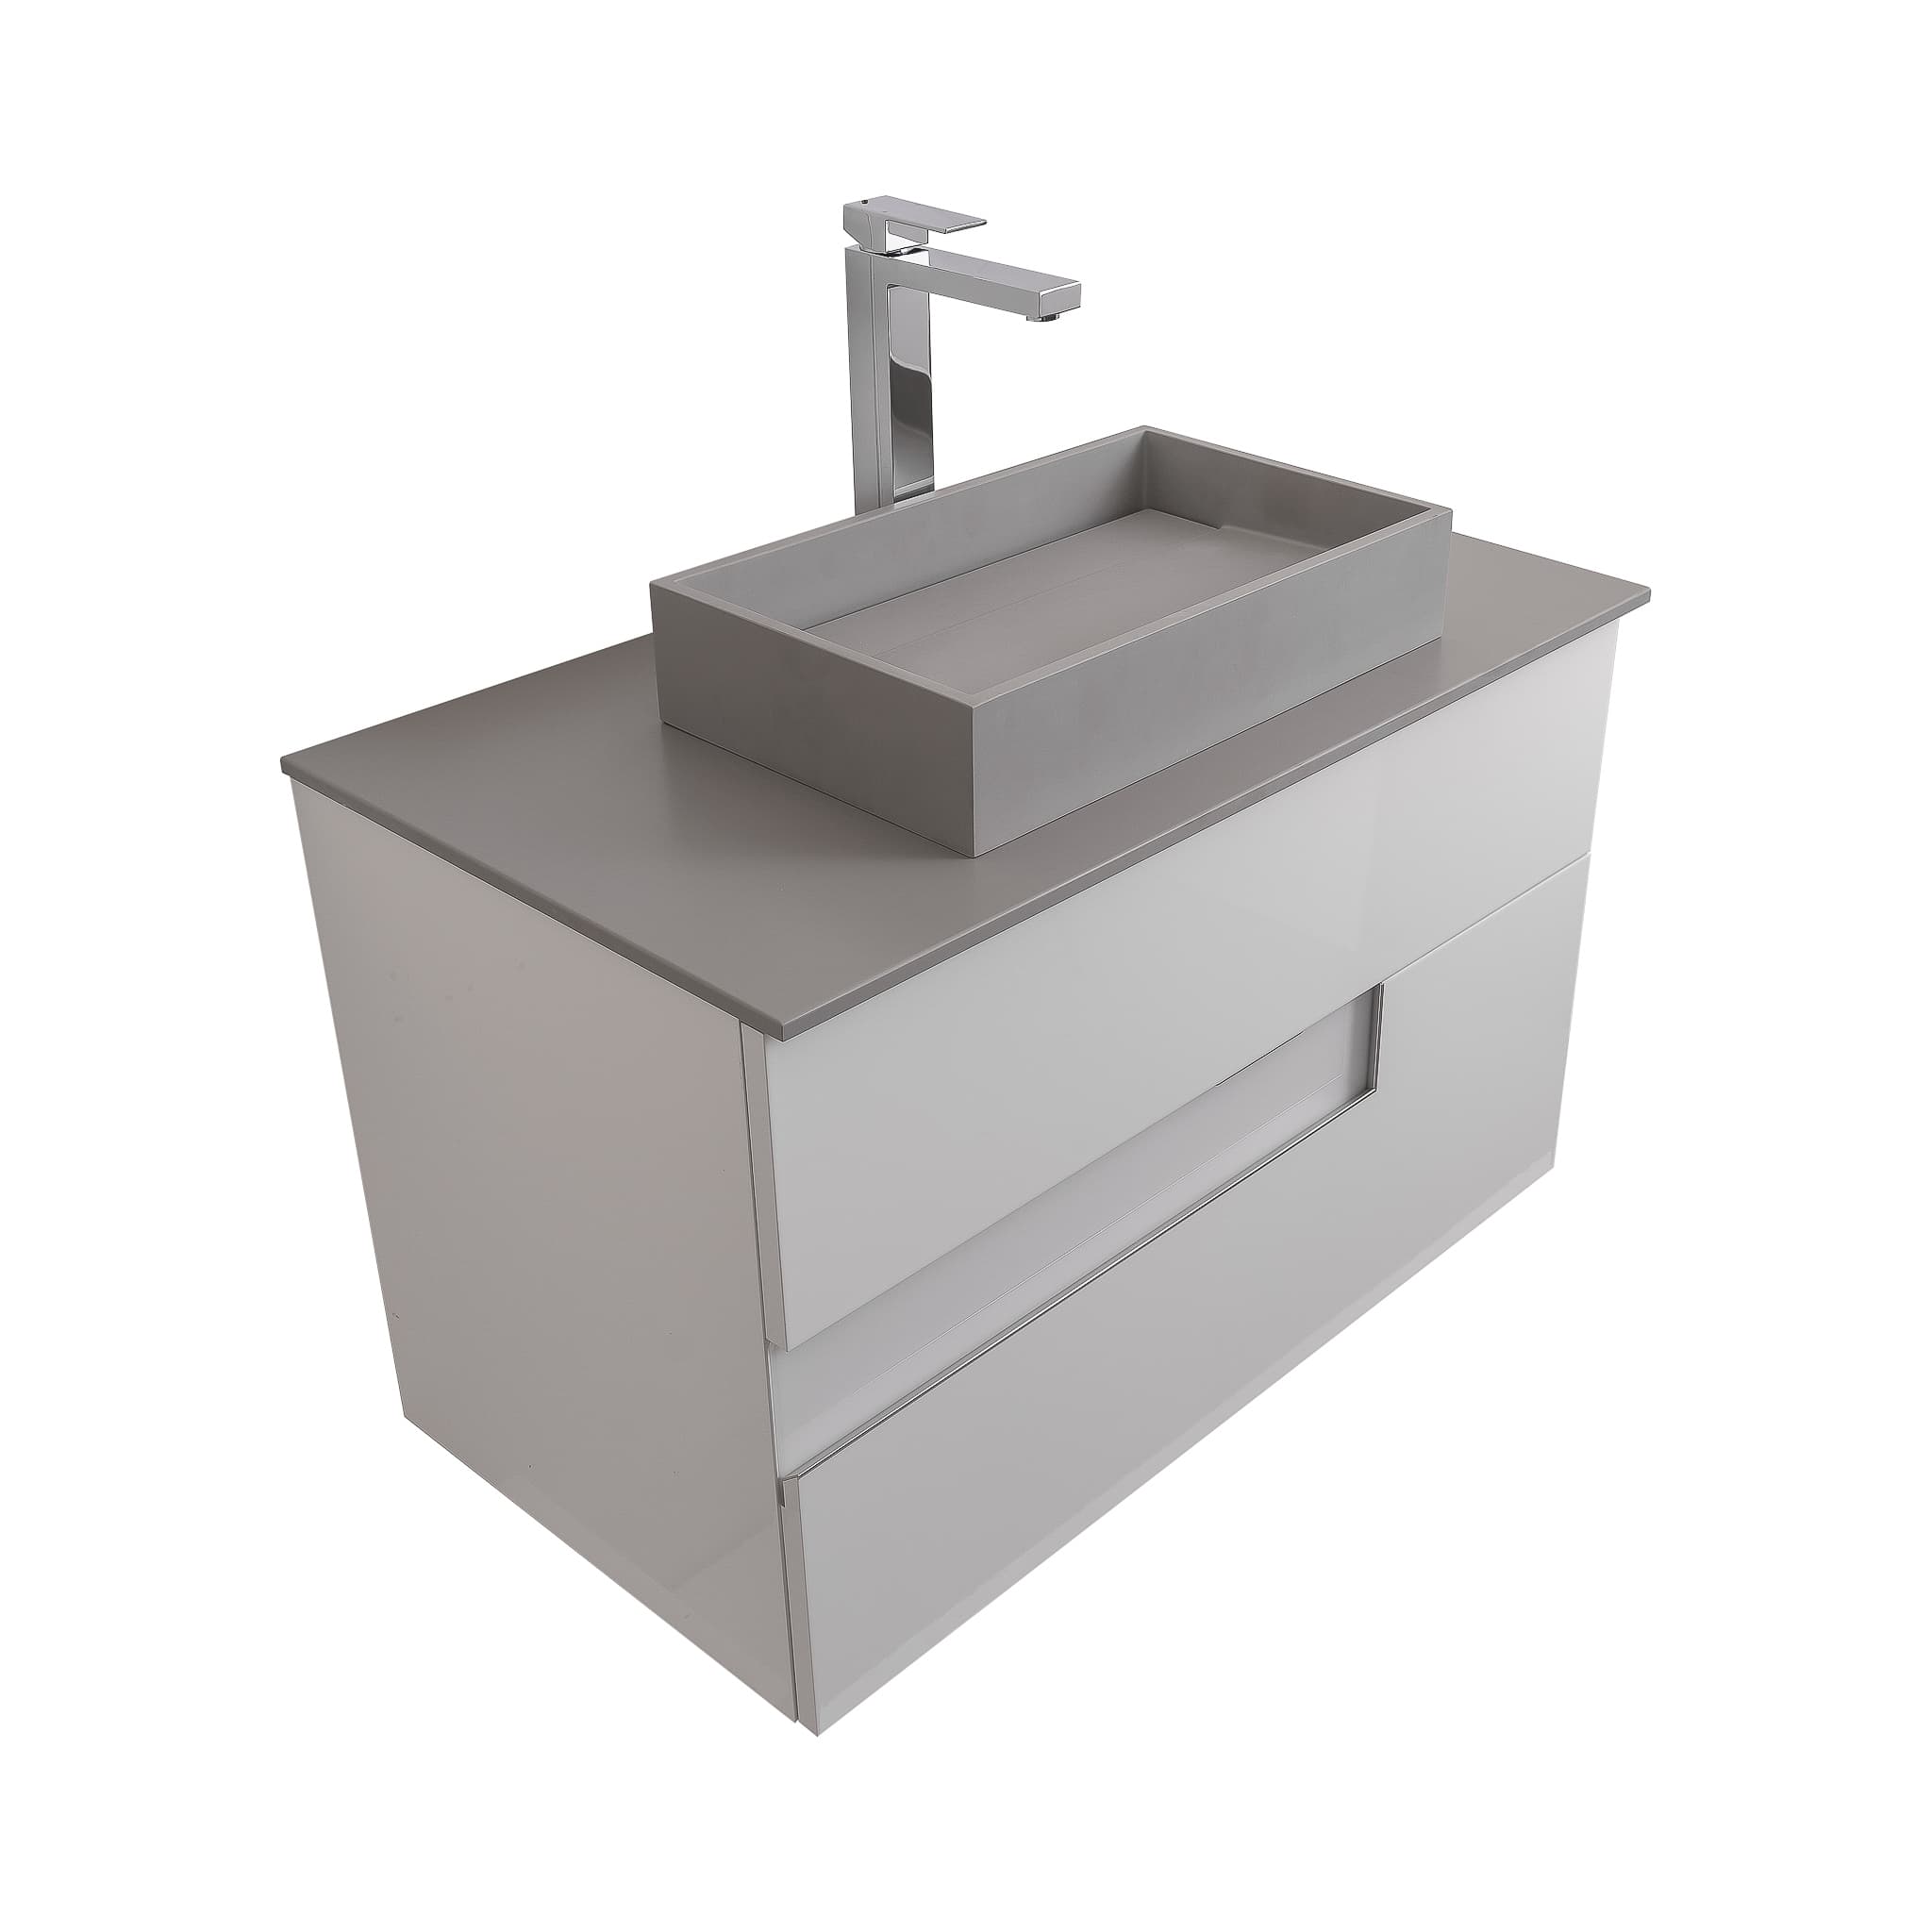 Vision 31.5 White High Gloss Cabinet, Solid Surface Flat Grey Counter And Infinity Square Solid Surface Grey Basin 1329, Wall Mounted Modern Vanity Set